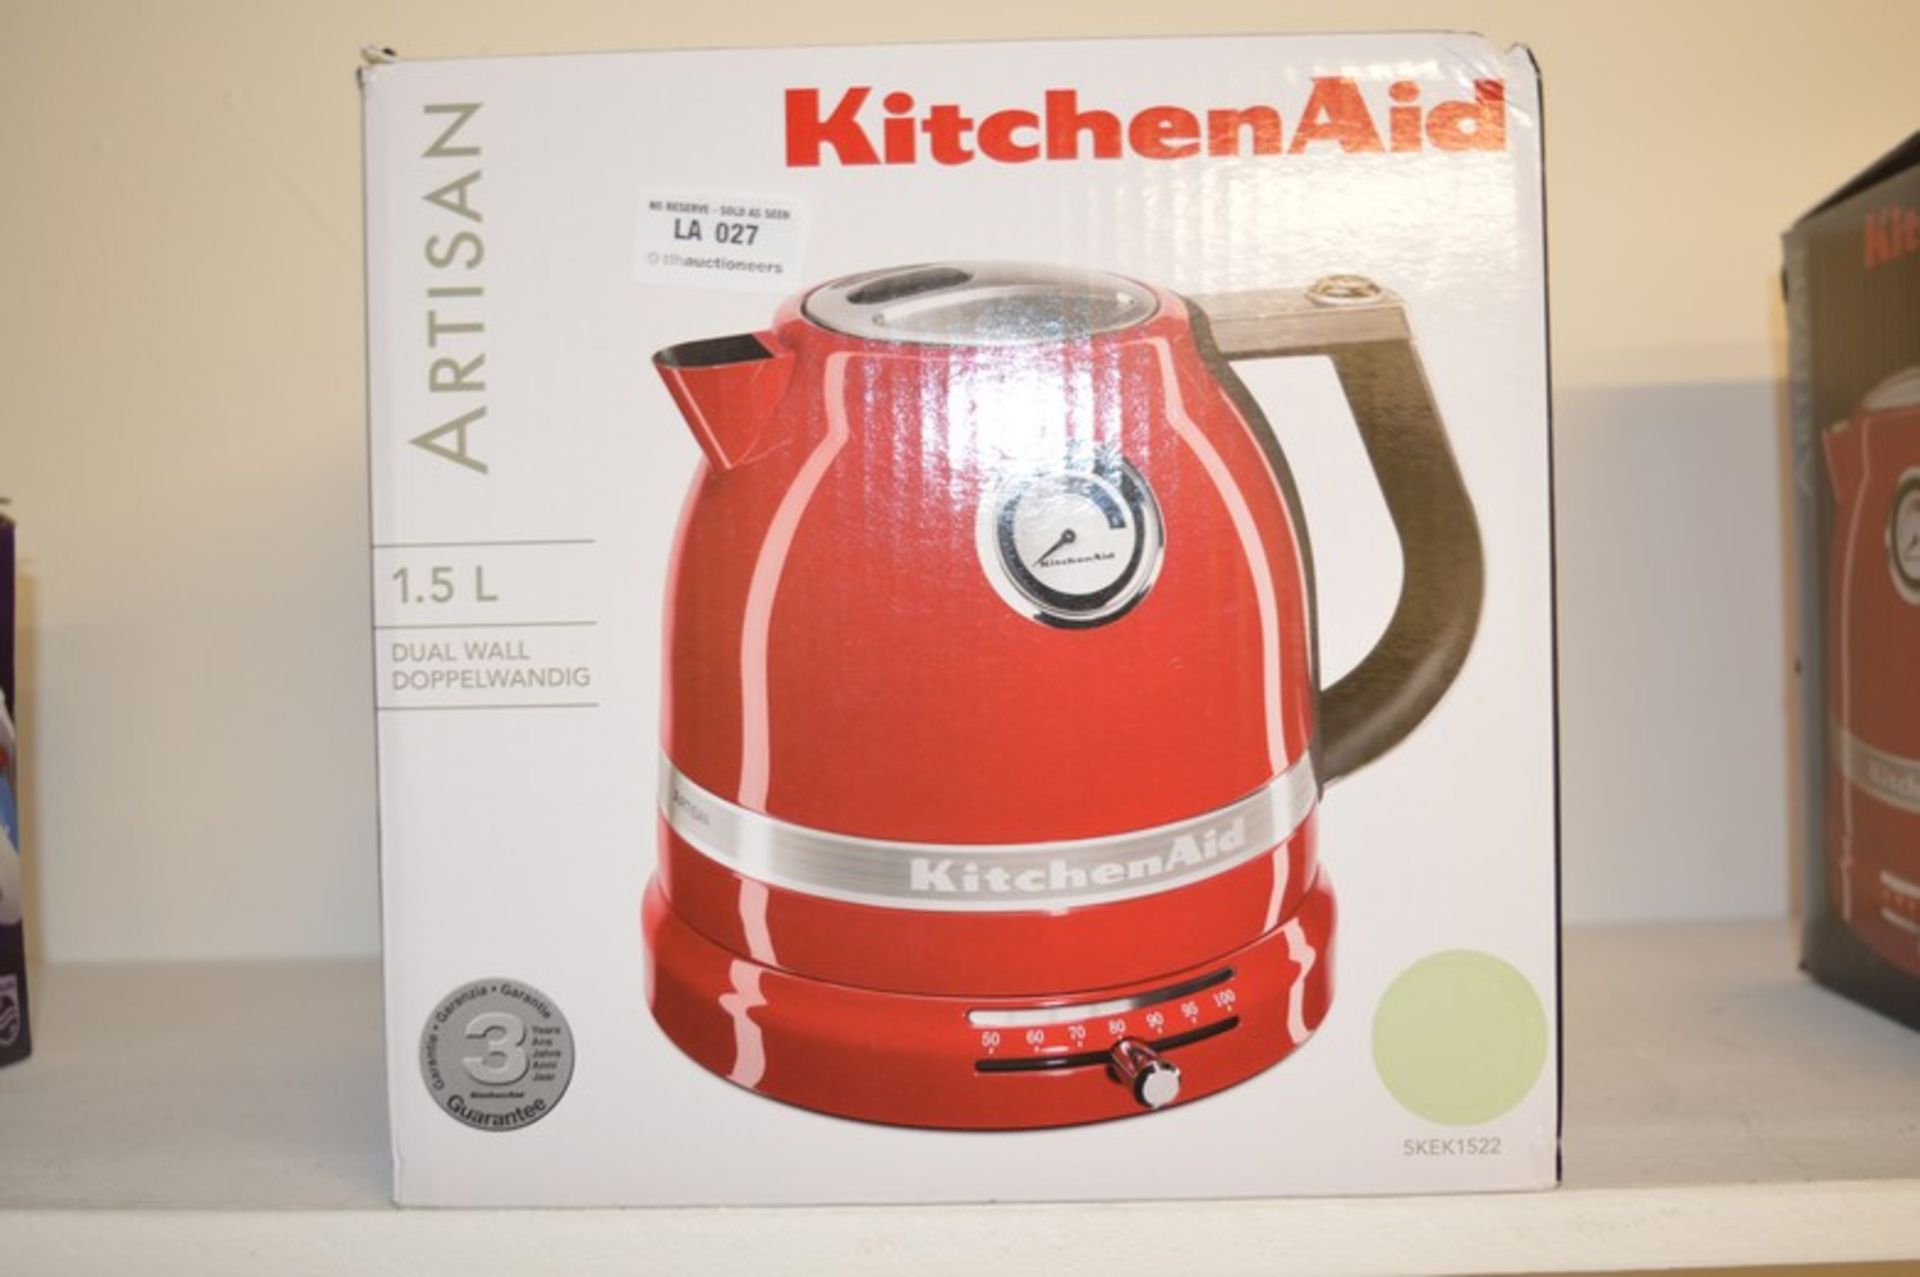 1 x BOXED KITCHEN AID ARTISAN 1.5 LITRE KETTLE RRP £130 02.11.16 *PLEASE NOTE THAT THE BID PRICE